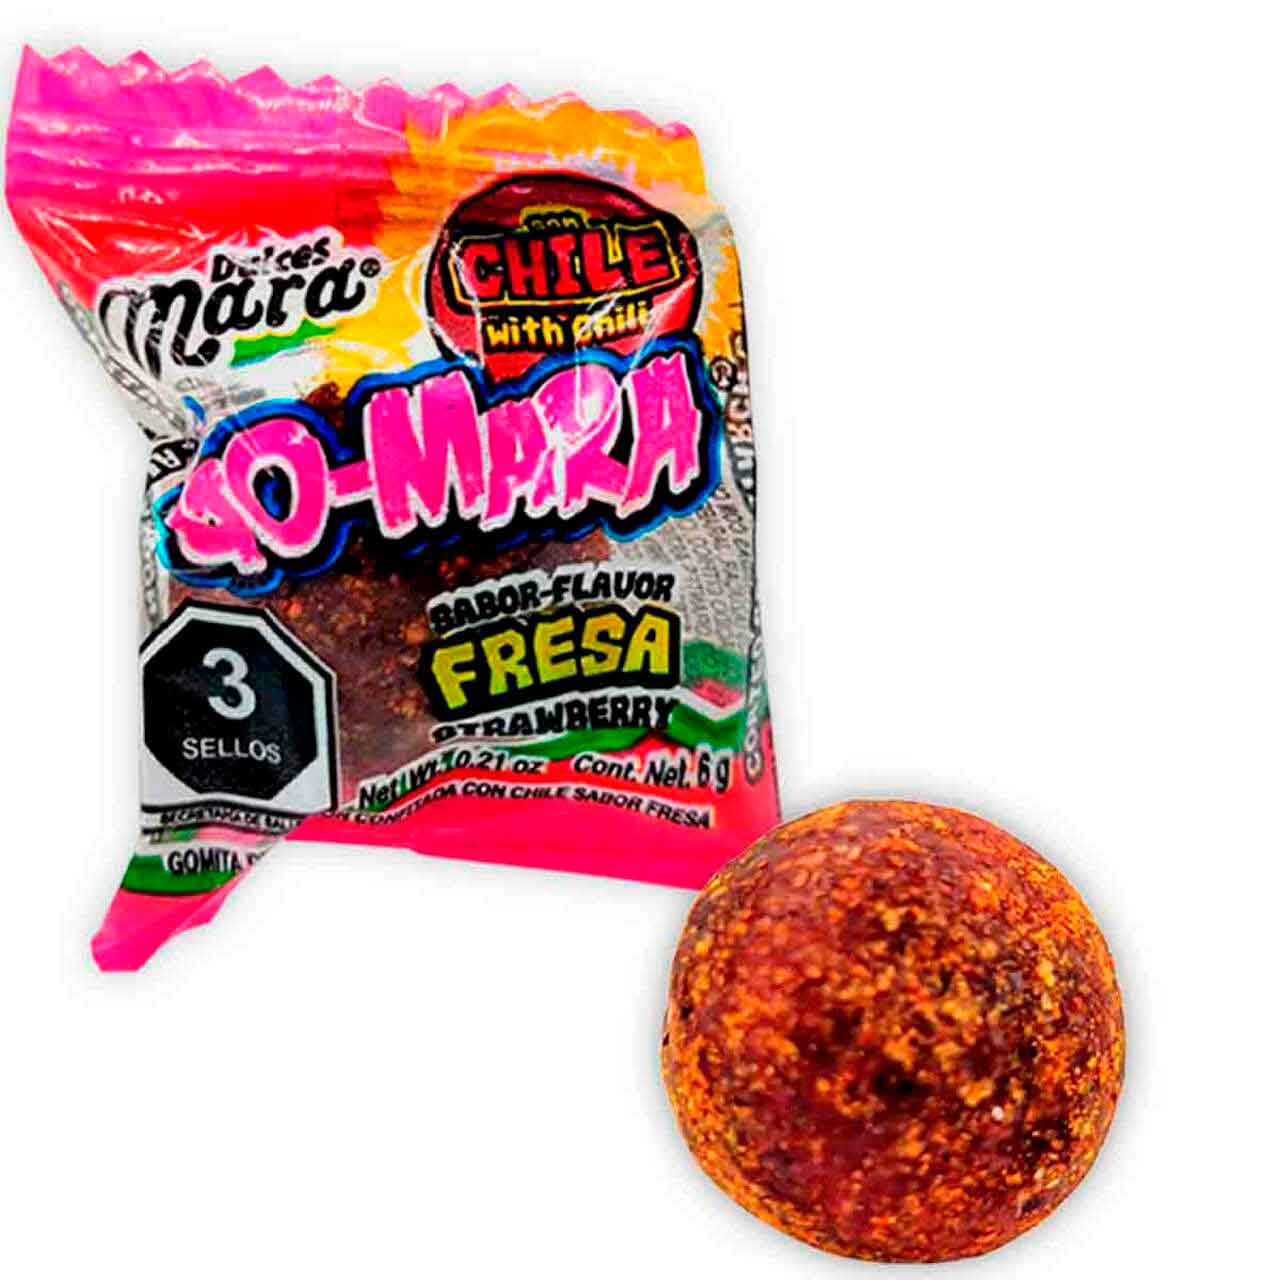 "GoMara" from the mexican brand of candies "Mara", are delicious and small ball shaped gummies with a spongy and chewy texture. This delicious gummies are flavored with a sweet and fruity essence of strawberries and it's surface is covered with a thin spicy layer of chili powder.